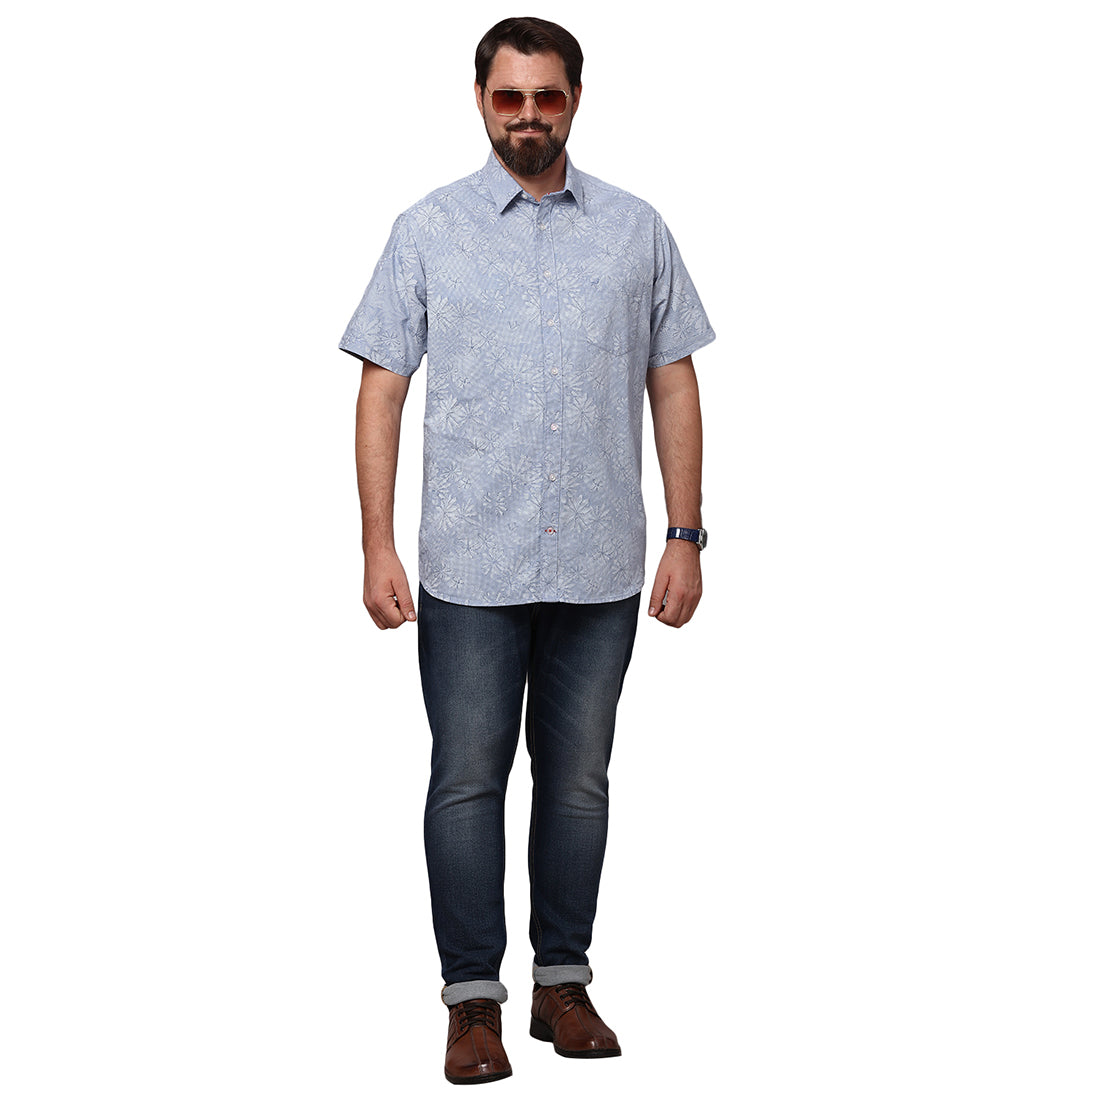 Big & Bold Print Blue Half Sleeves Slim Fit Casual Shirts (Plus Size) - Double Two